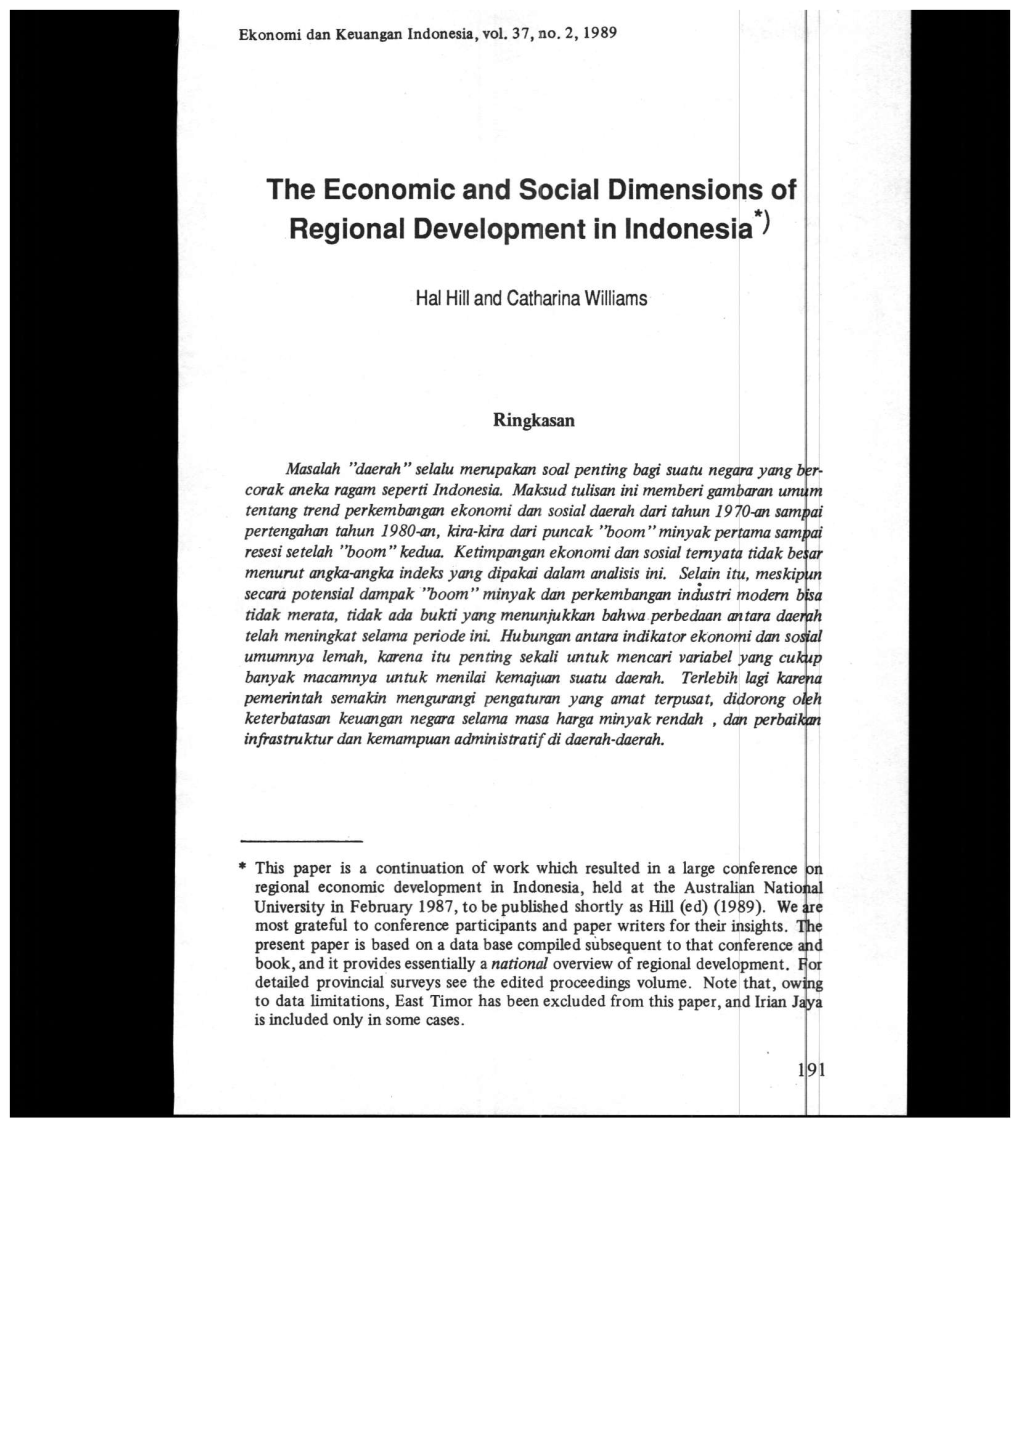 The Economic and Social Dimensions of Regional Development in Indonesia*^